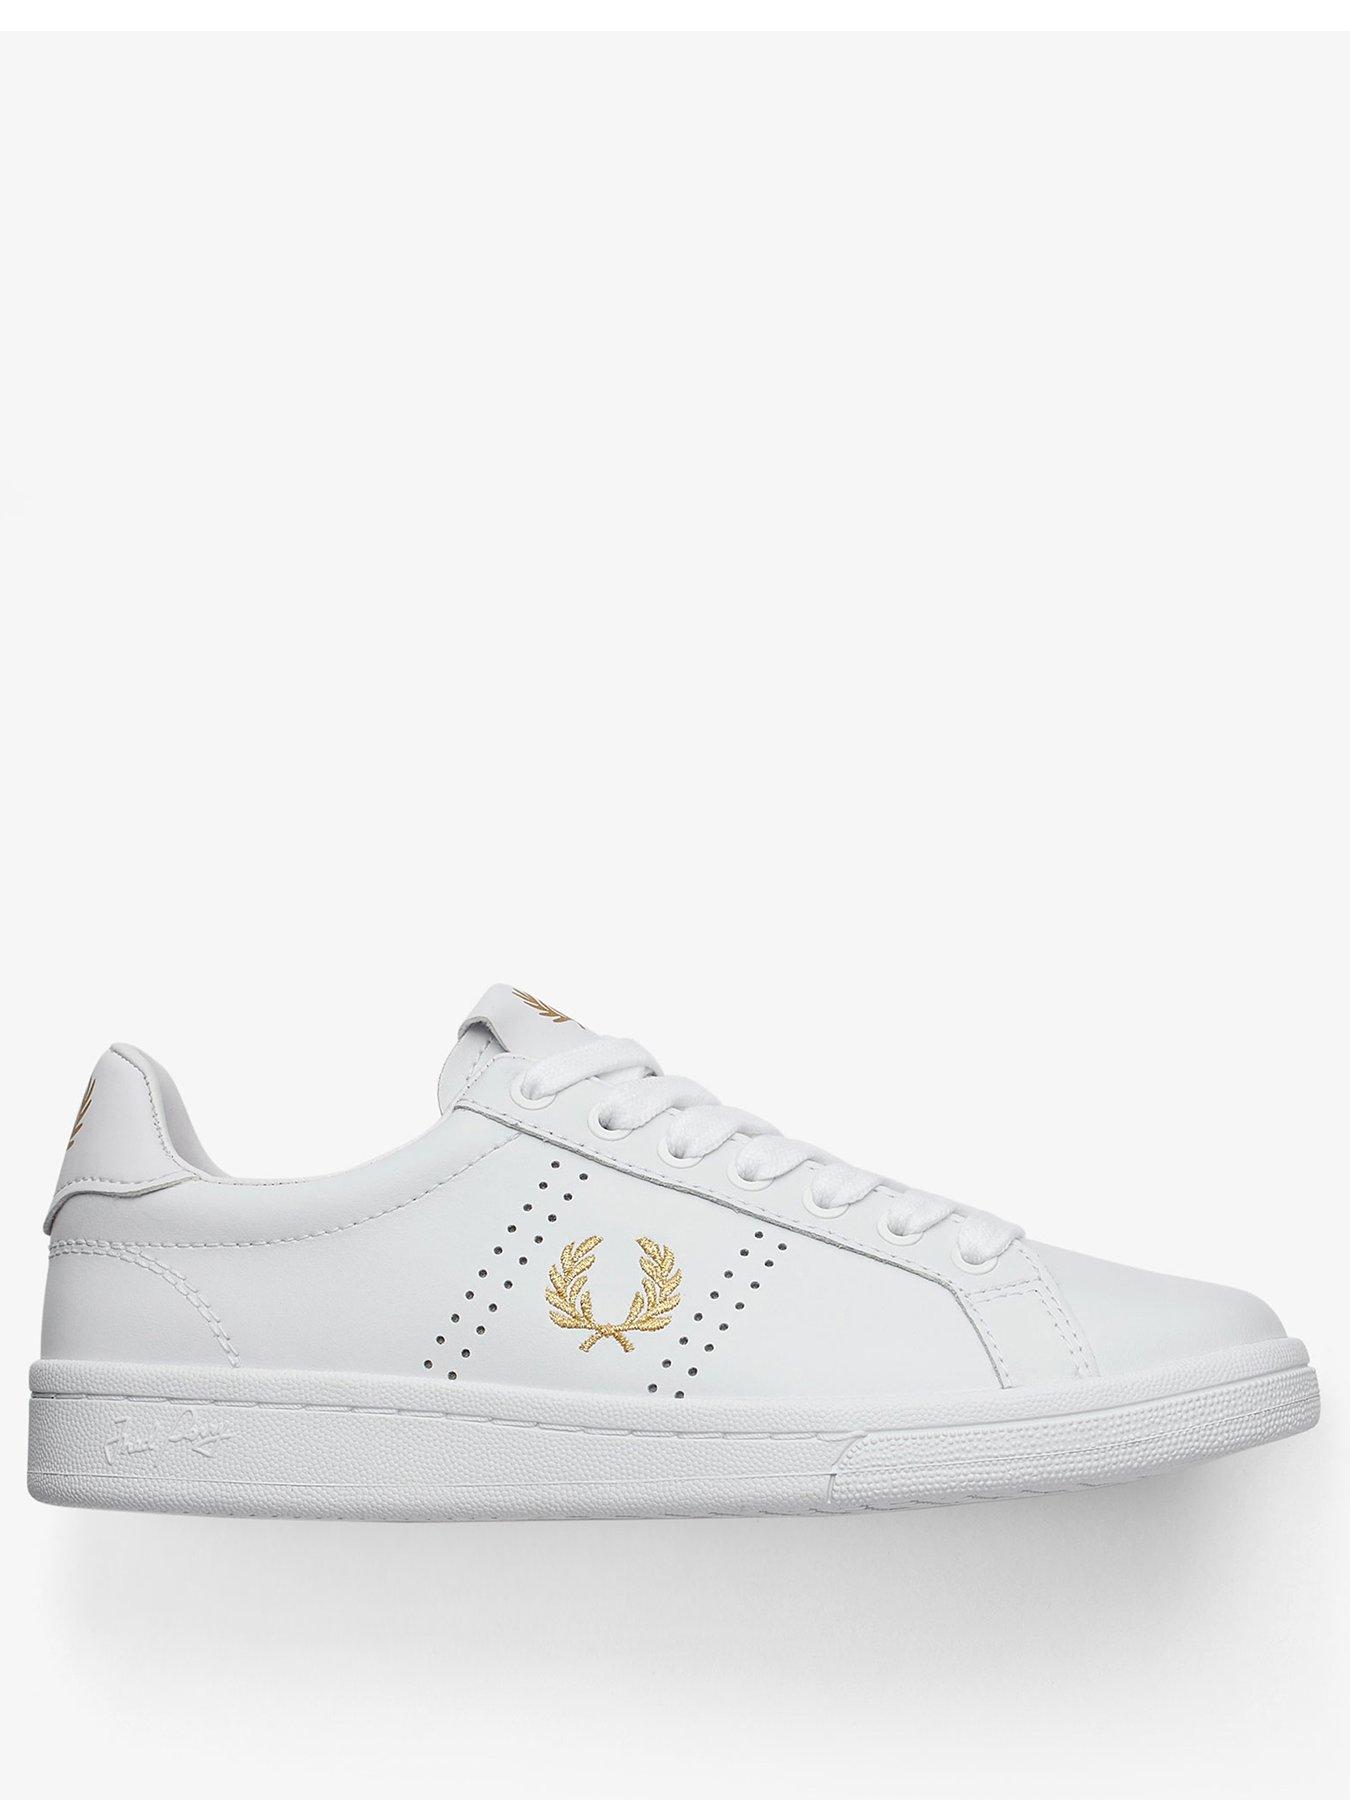 Fred perry | Shoes \u0026 boots | Women 